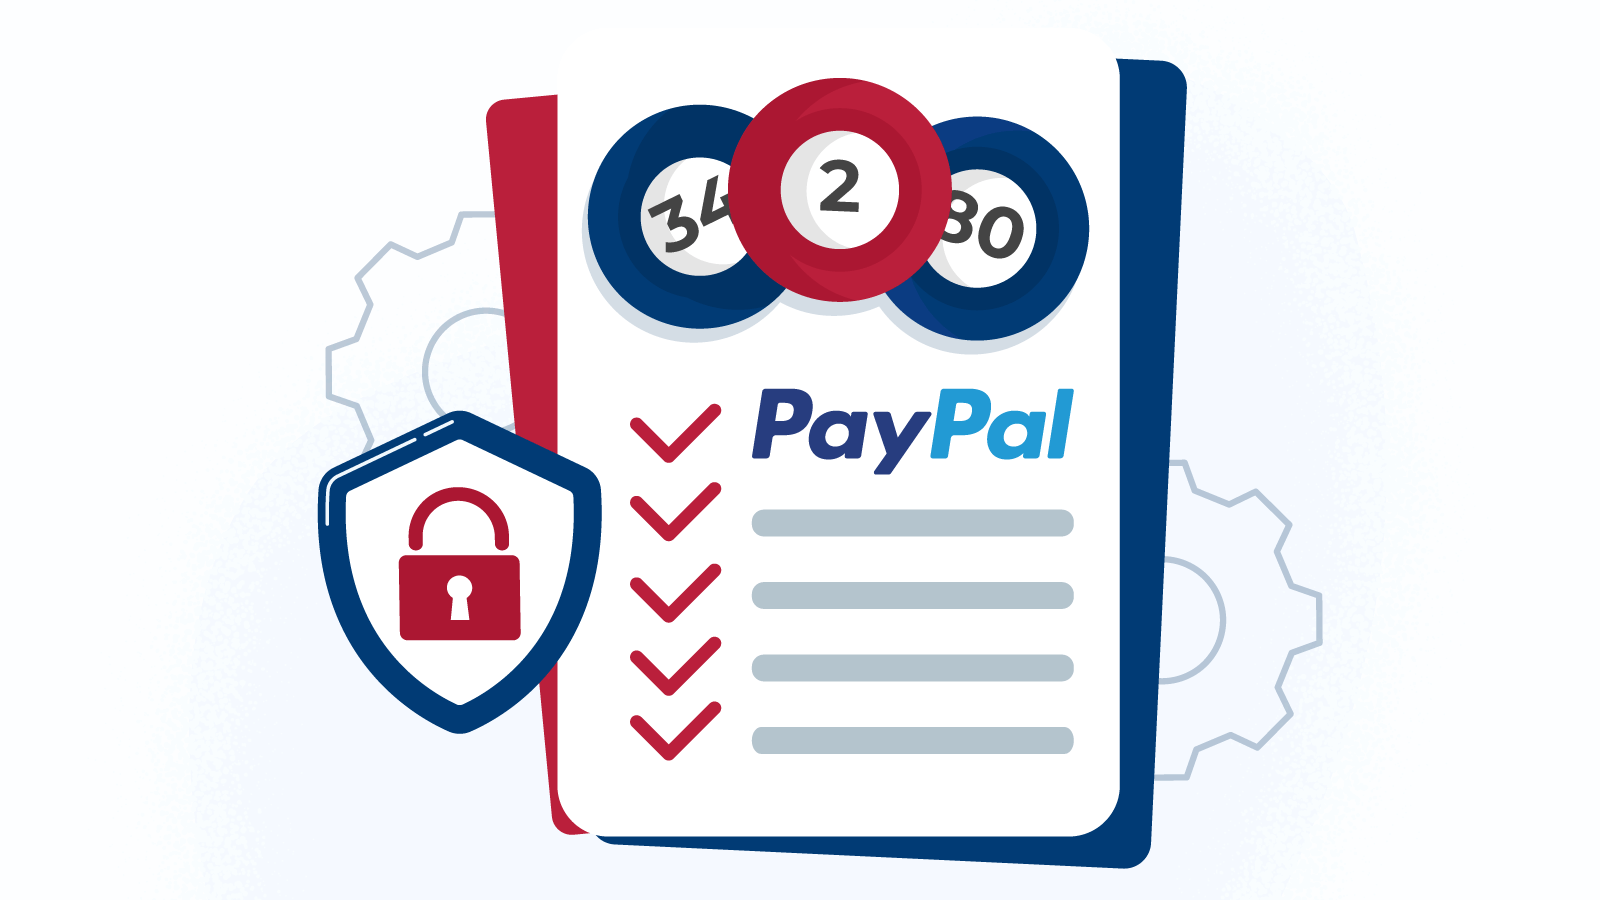 Why Use PayPal On Bingo Sites